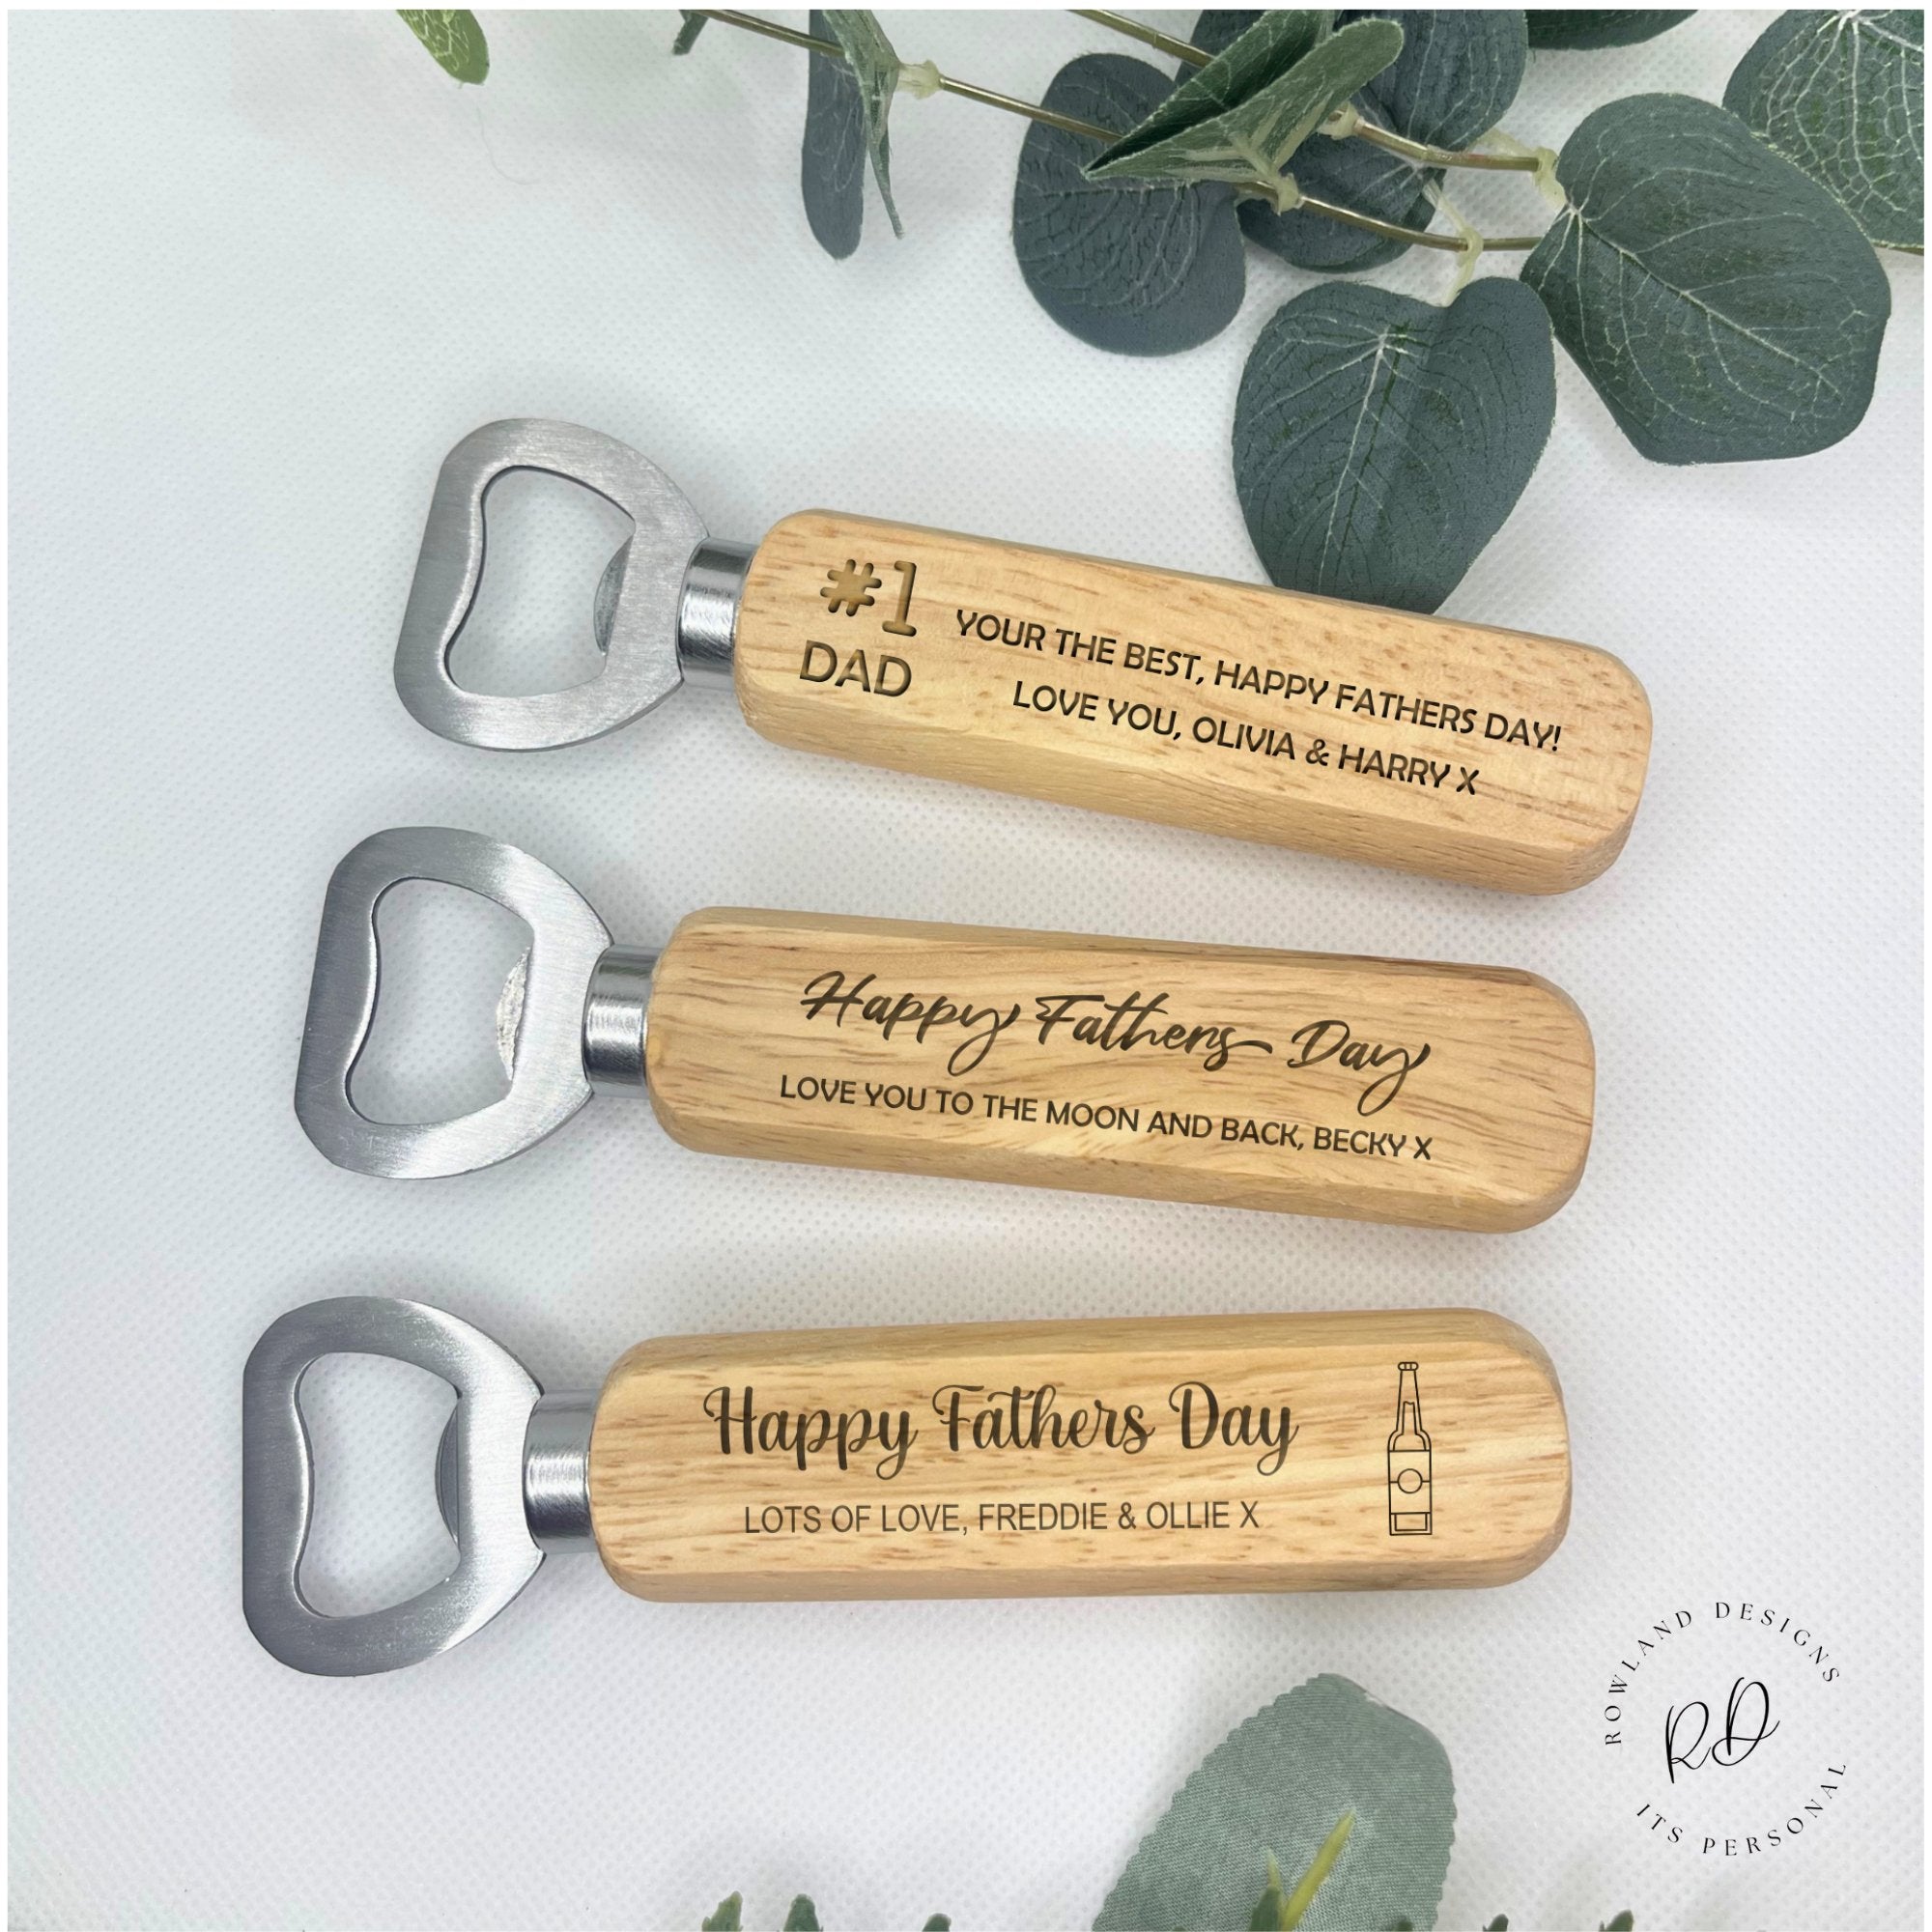 Personalised wooden bottle opener made from high-quality wood, featuring a custom engraved name and special message. The bottle opener is prominently displayed and the detailed wood grain is visible. Also shown is the metal part of the opener, demonstrating its functionality. The product is pictured in a homely setting, highlighting its ideal use for family gatherings and daily use. The image includes a Father's Day theme with associated graphics such as ties and beer mugs.